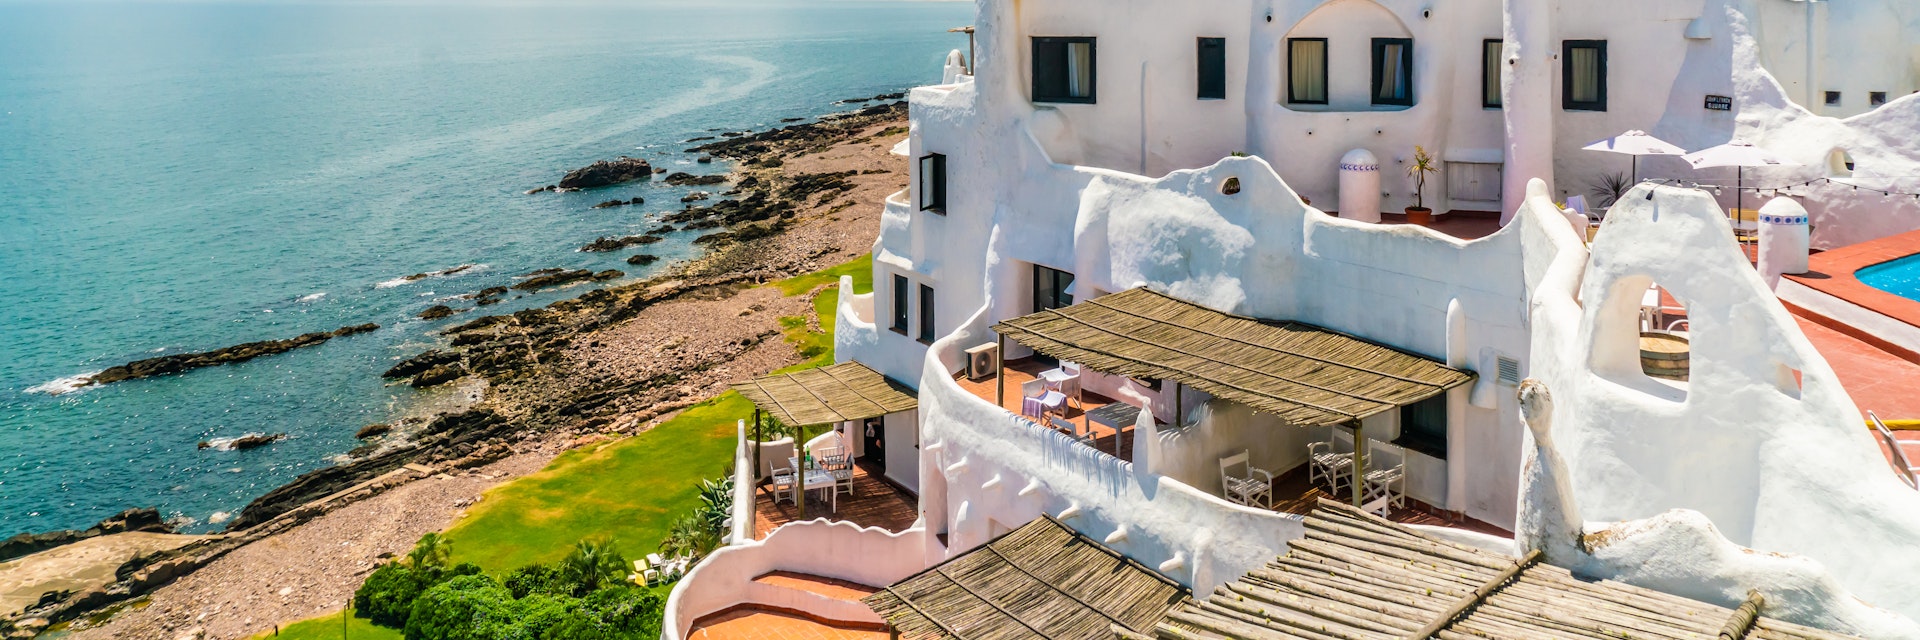 View from the famous Casapueblo, the whitewashed cement and stucco buildings near the town of Punta Del Este, Uruguay.